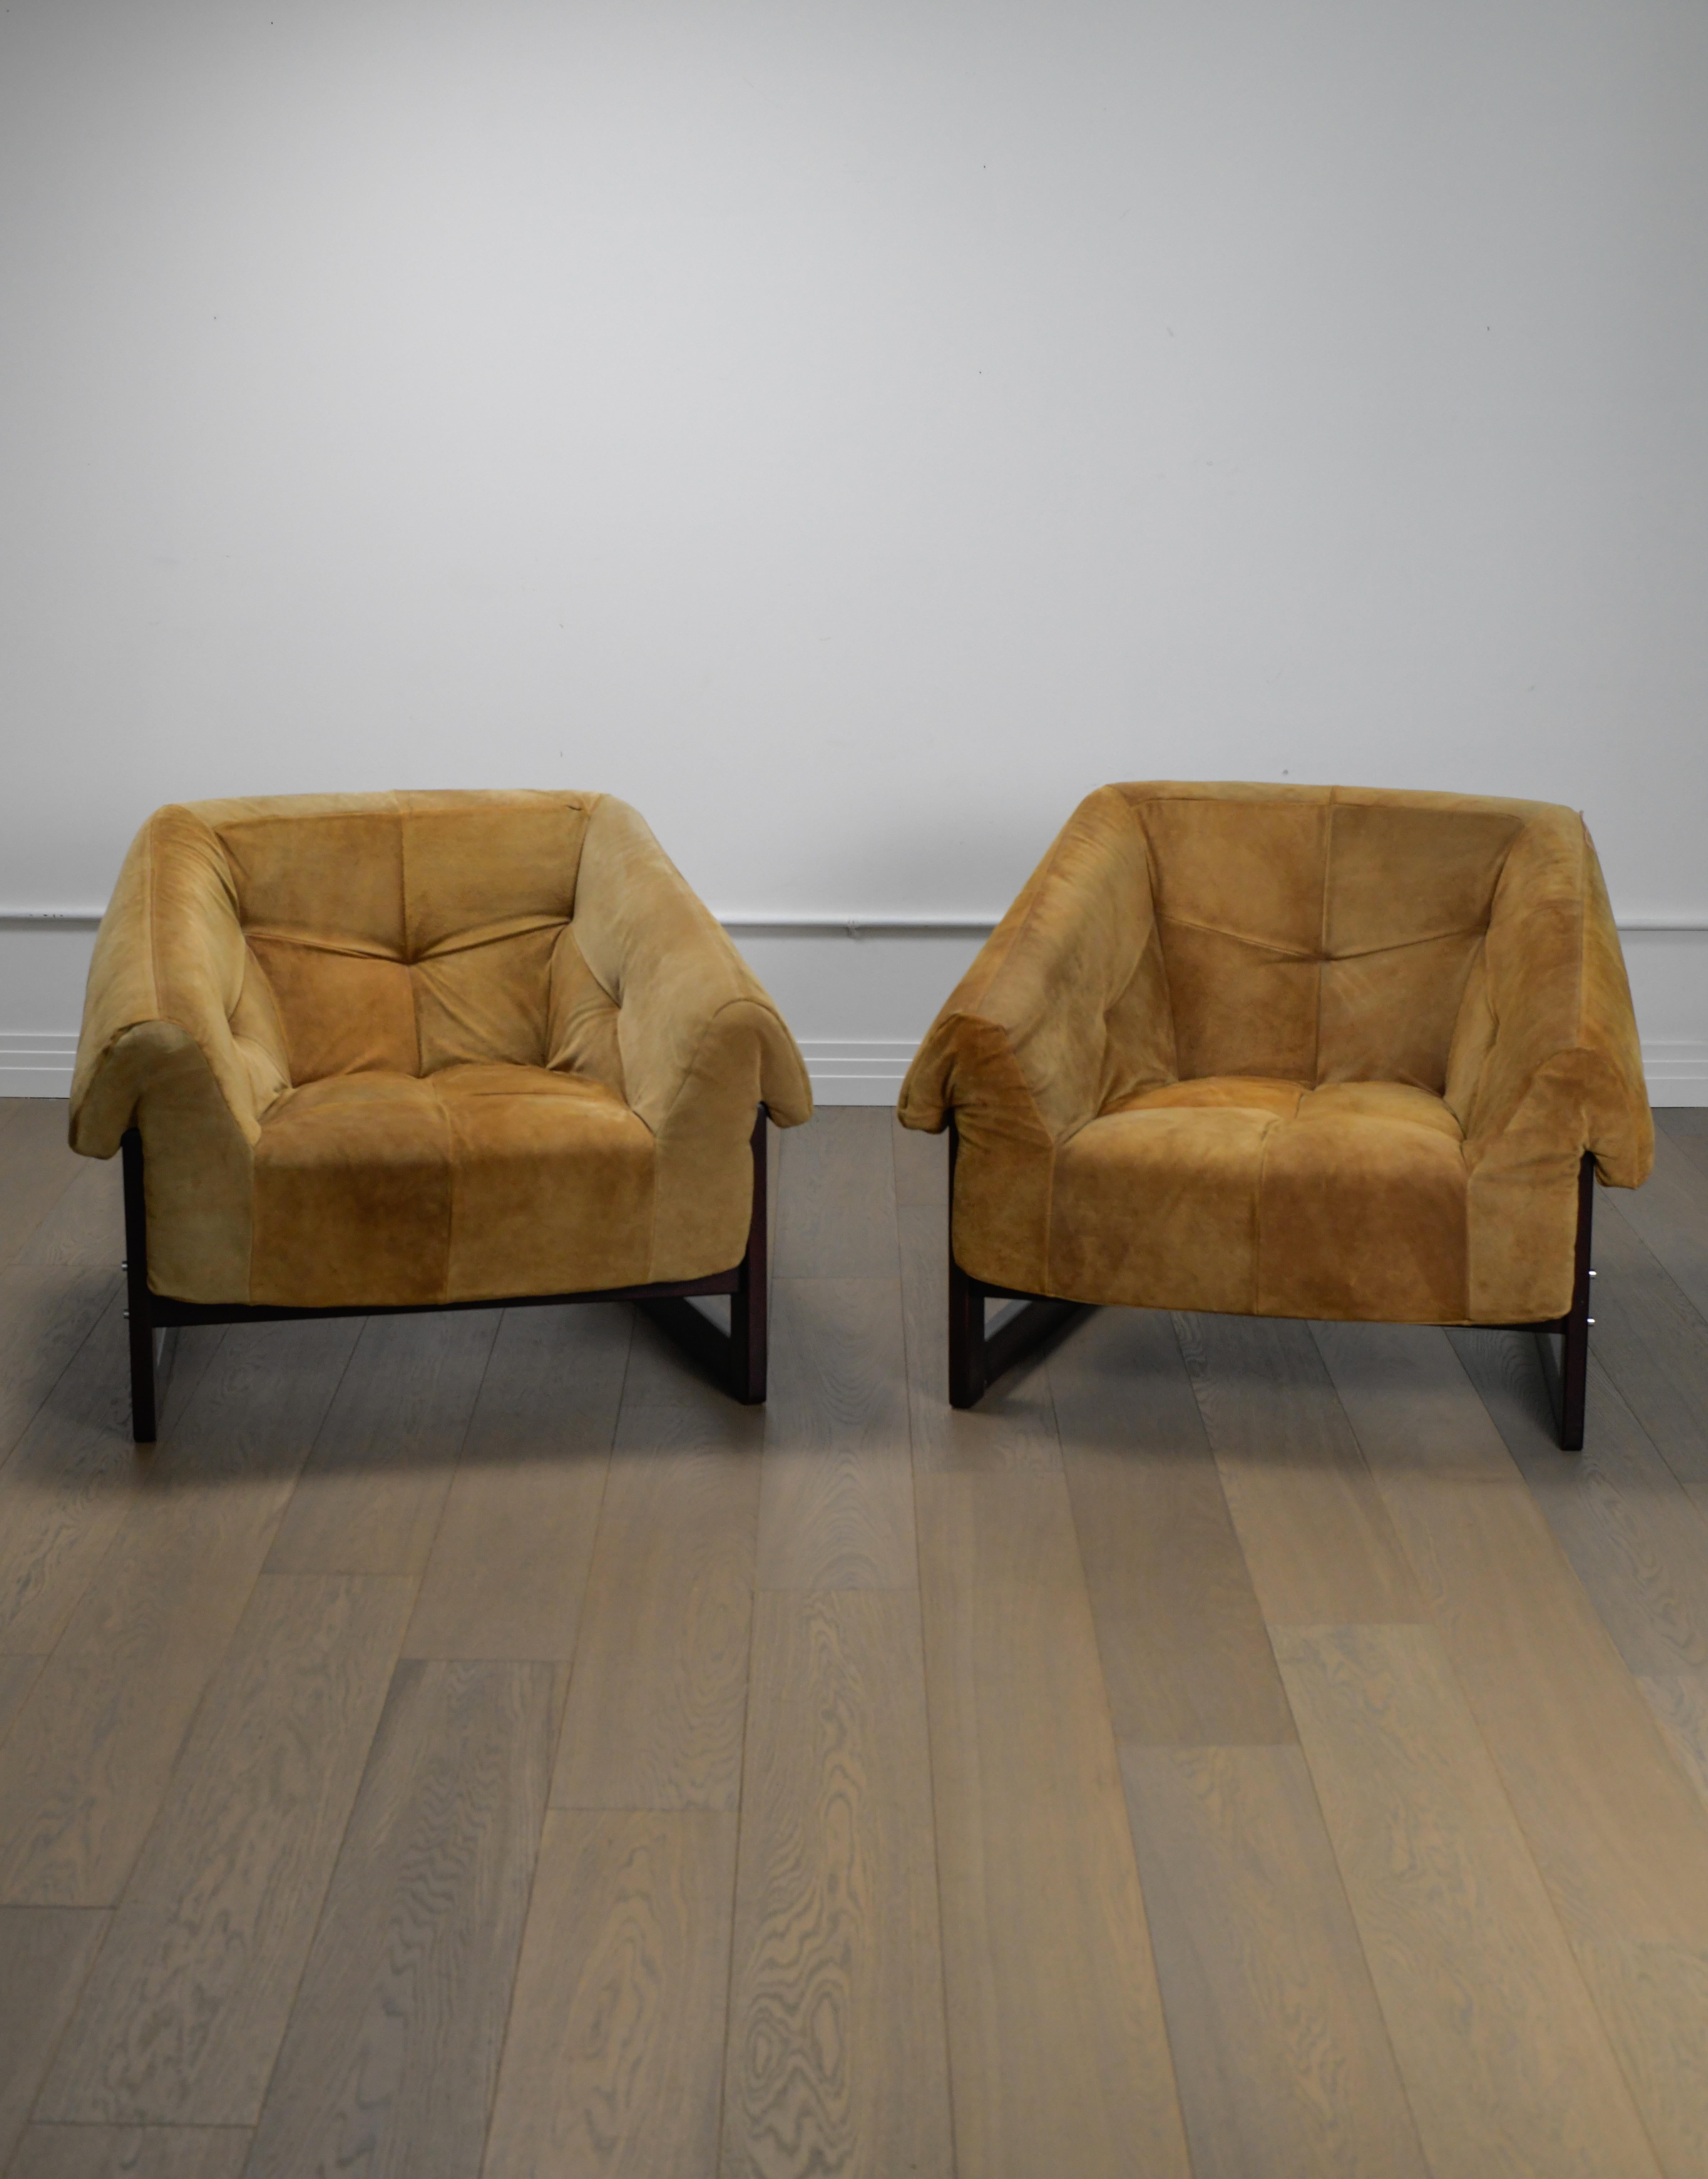 Pair of 1970 Percival Lafer lounge chairs in a beautiful honey suede upholstery with rosewood bases. Produced by Lafer S.A. - These chairs are in good vintage condition with a beautiful patina appropriate with their age. Manufacturers label on the